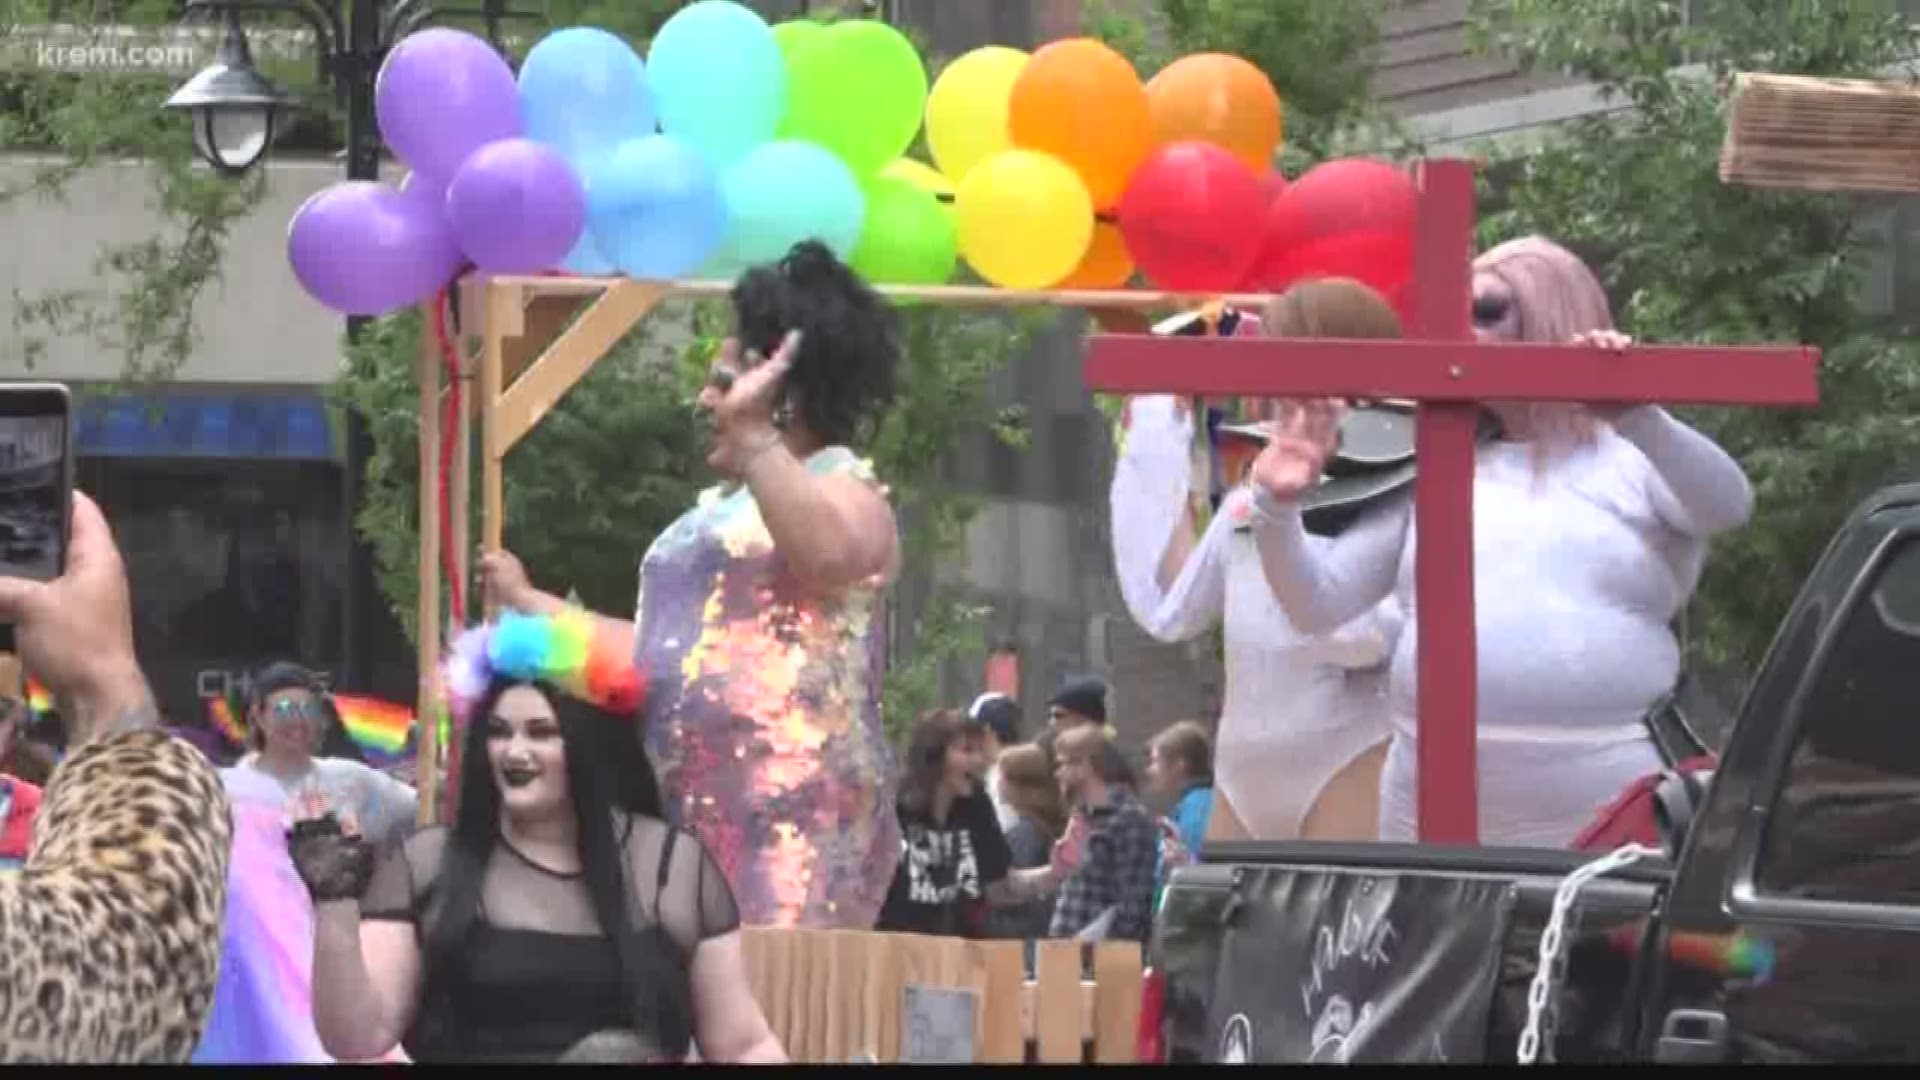 Organizers of Spokane Pride 2019 were hoping to reach 20,000 people, but the turnout was far beyond that at 27,000.